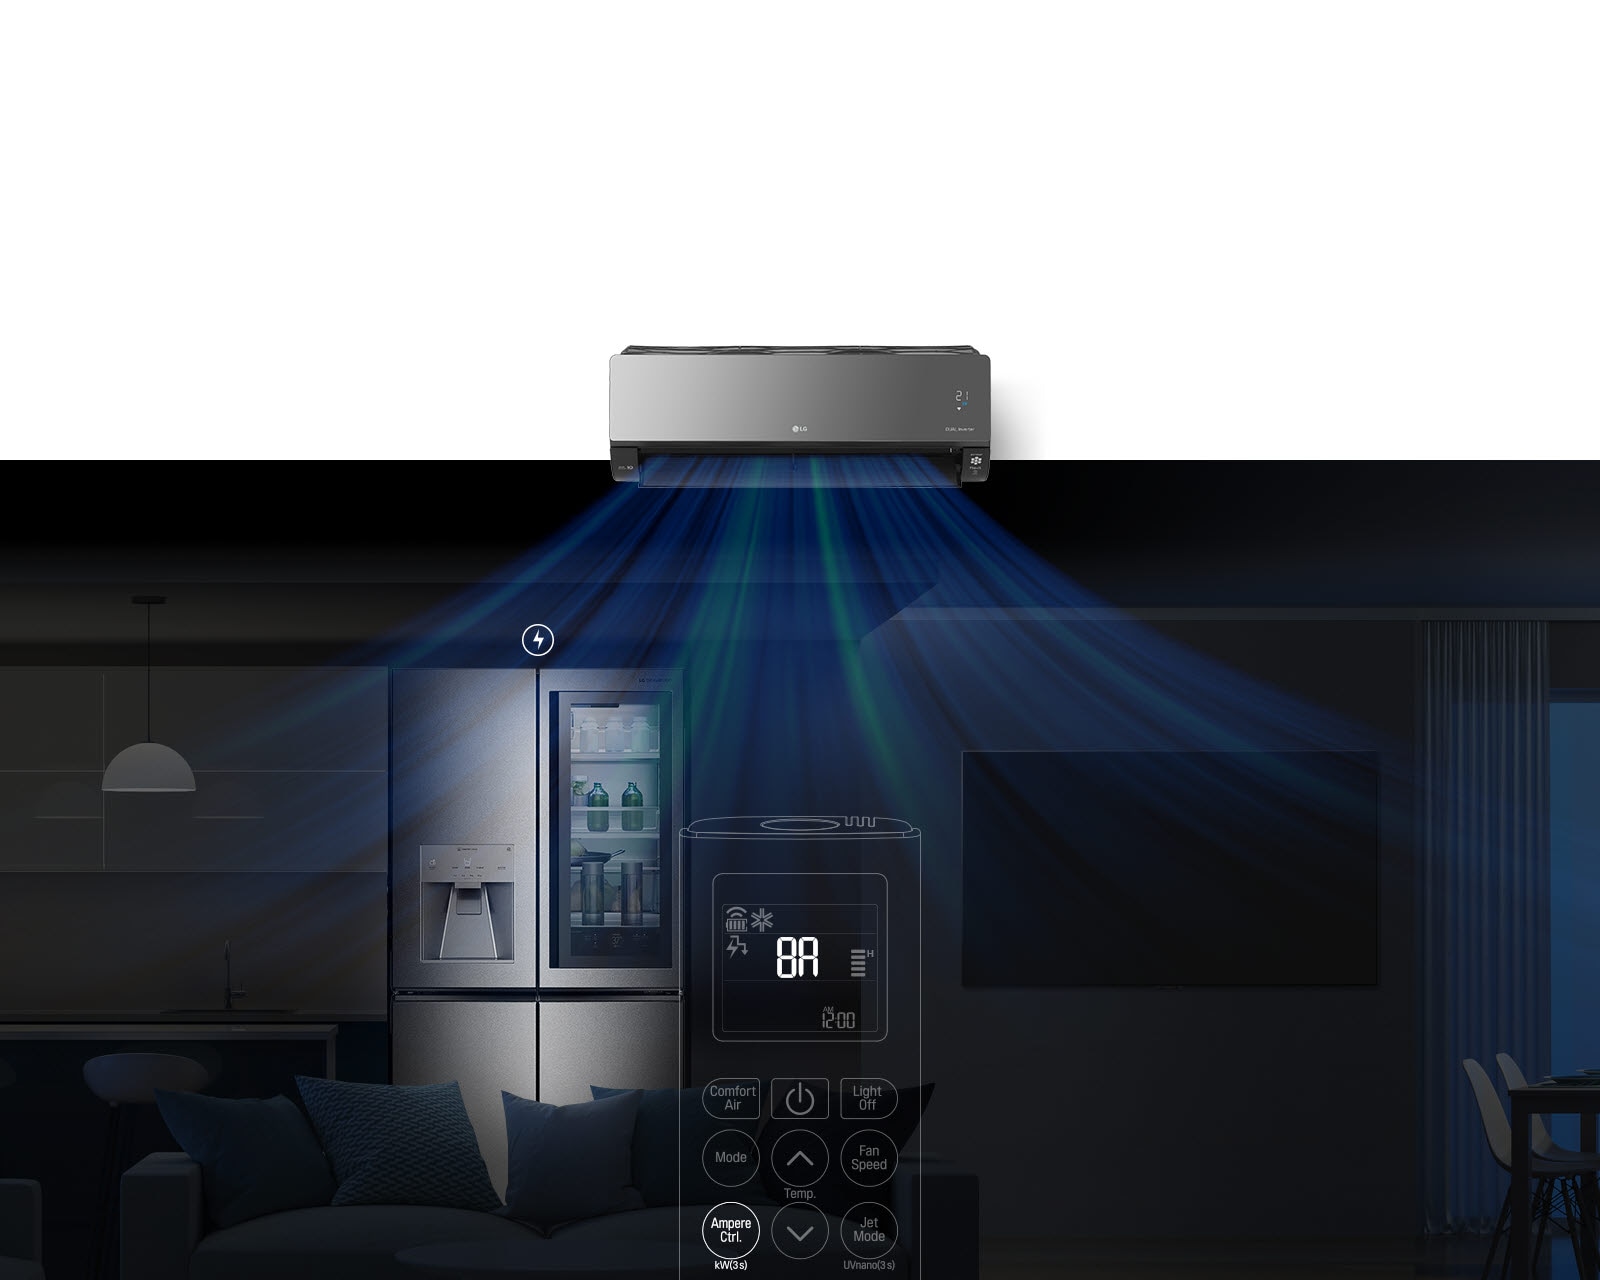 A dark image of a living room/kitchen space is in the background. The refrigerator is lit up and has a lightning bolt icon above it.The remote control device comes onto the screen. The buttons are highlighted as if someone has pushed them and the settings change. A blue light comes from the air conditioner as air. The TV turns on and the lightning bolt icon appears above it. Another burst of blue light comes from the air conditioner as air. The light in the kitchen turns on and the lightning bolt icon below it. 